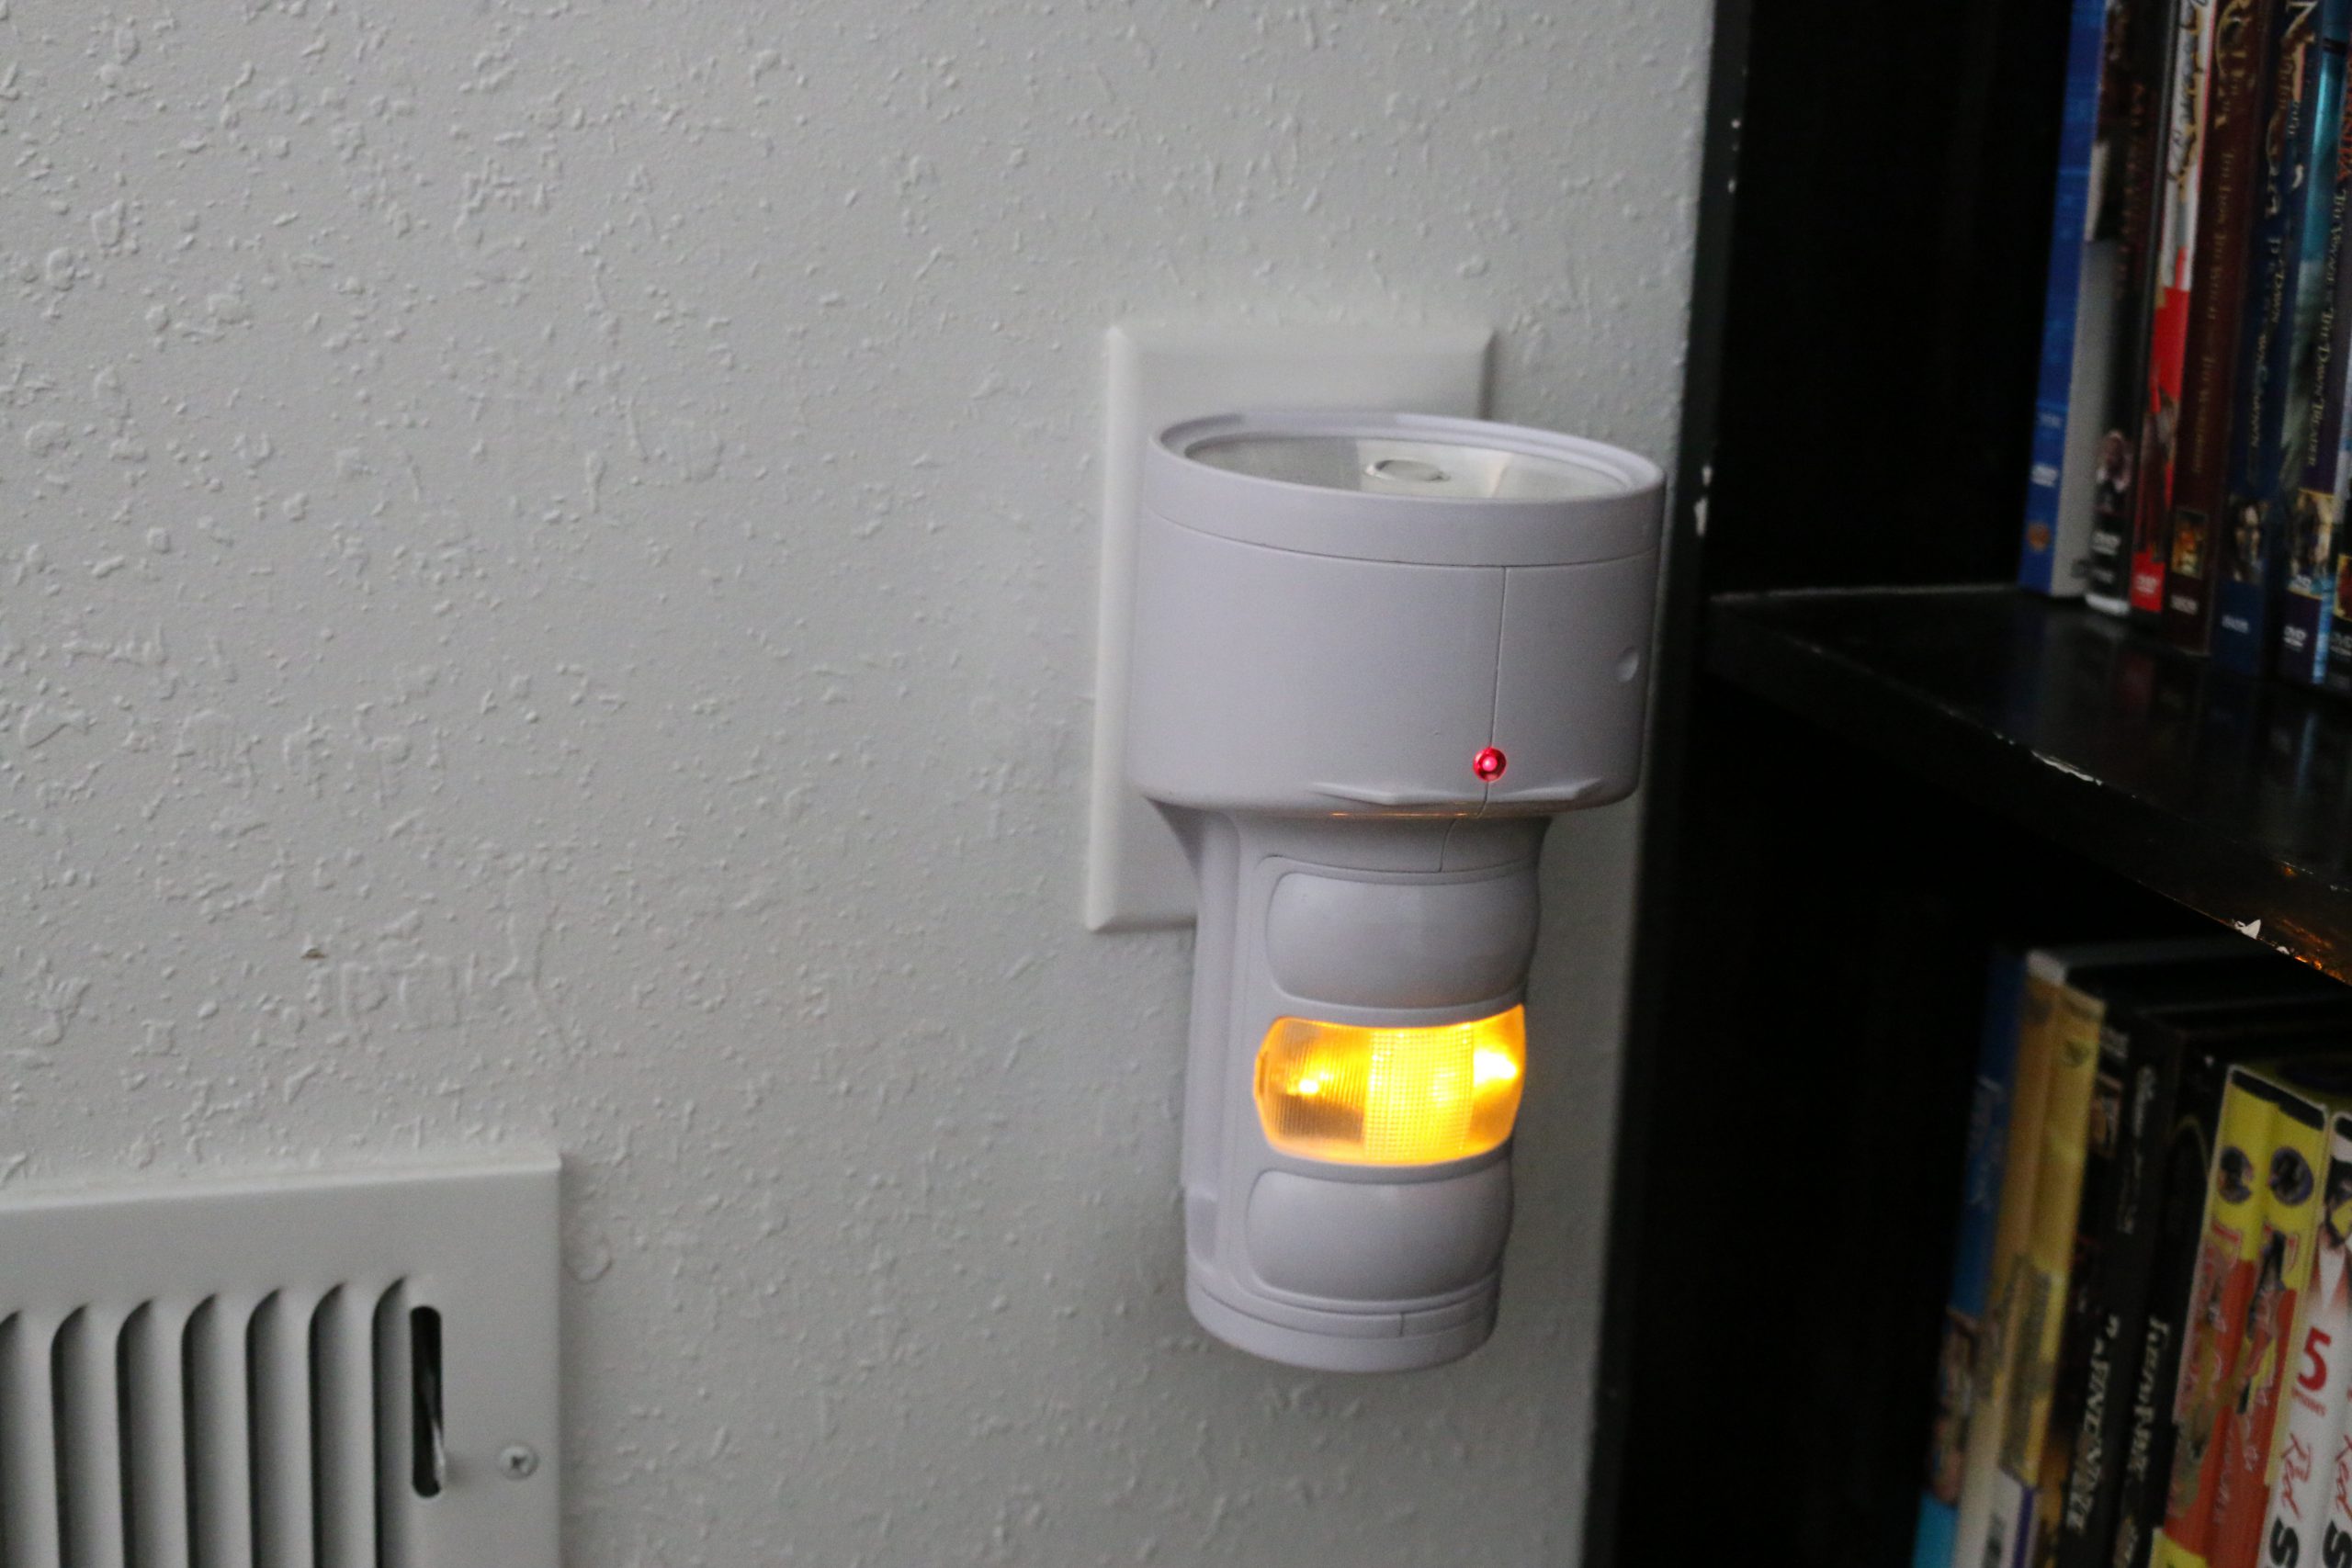 Emergency flashlight plugged into wall electrical outlet.